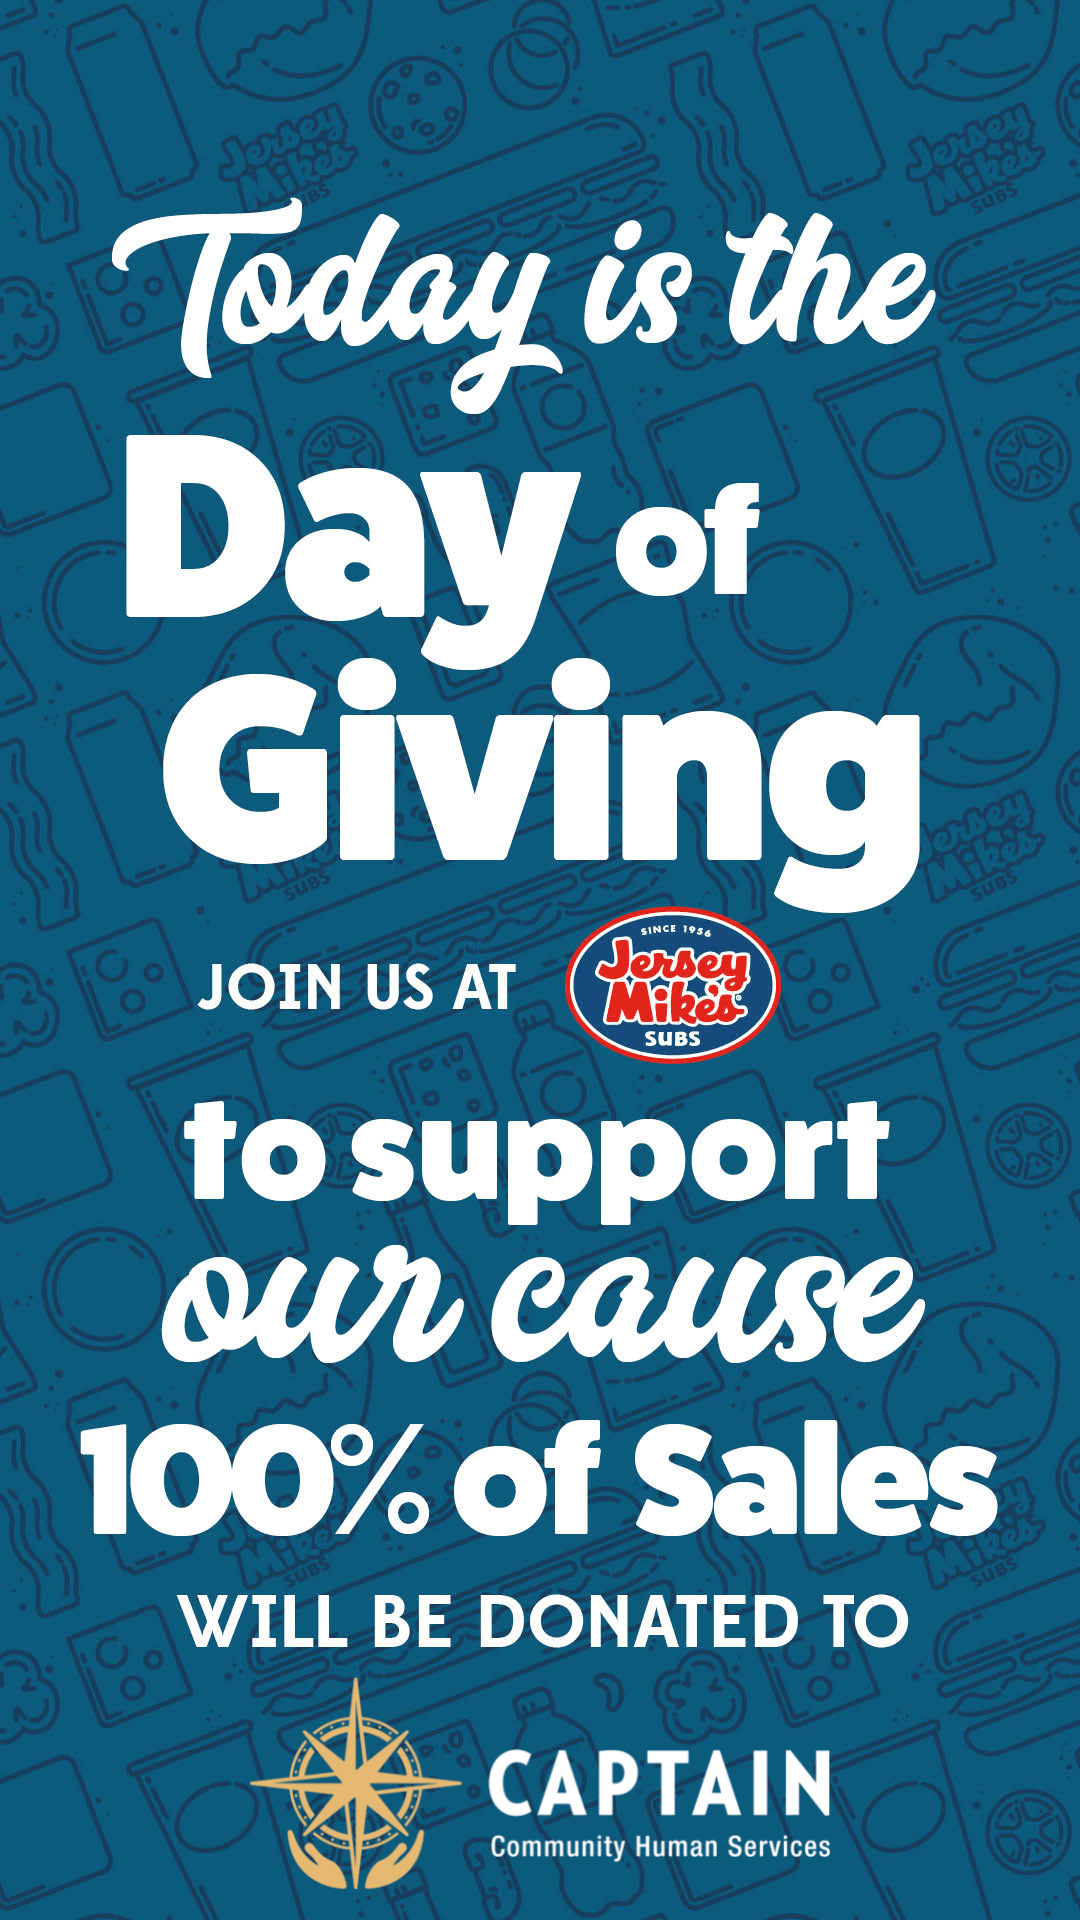 TODAY! Eat a Sub, Help Our Community! 11 Local Jersey Mike’s Locations Will Donate 100% of Sales to CAPTAIN CHS!